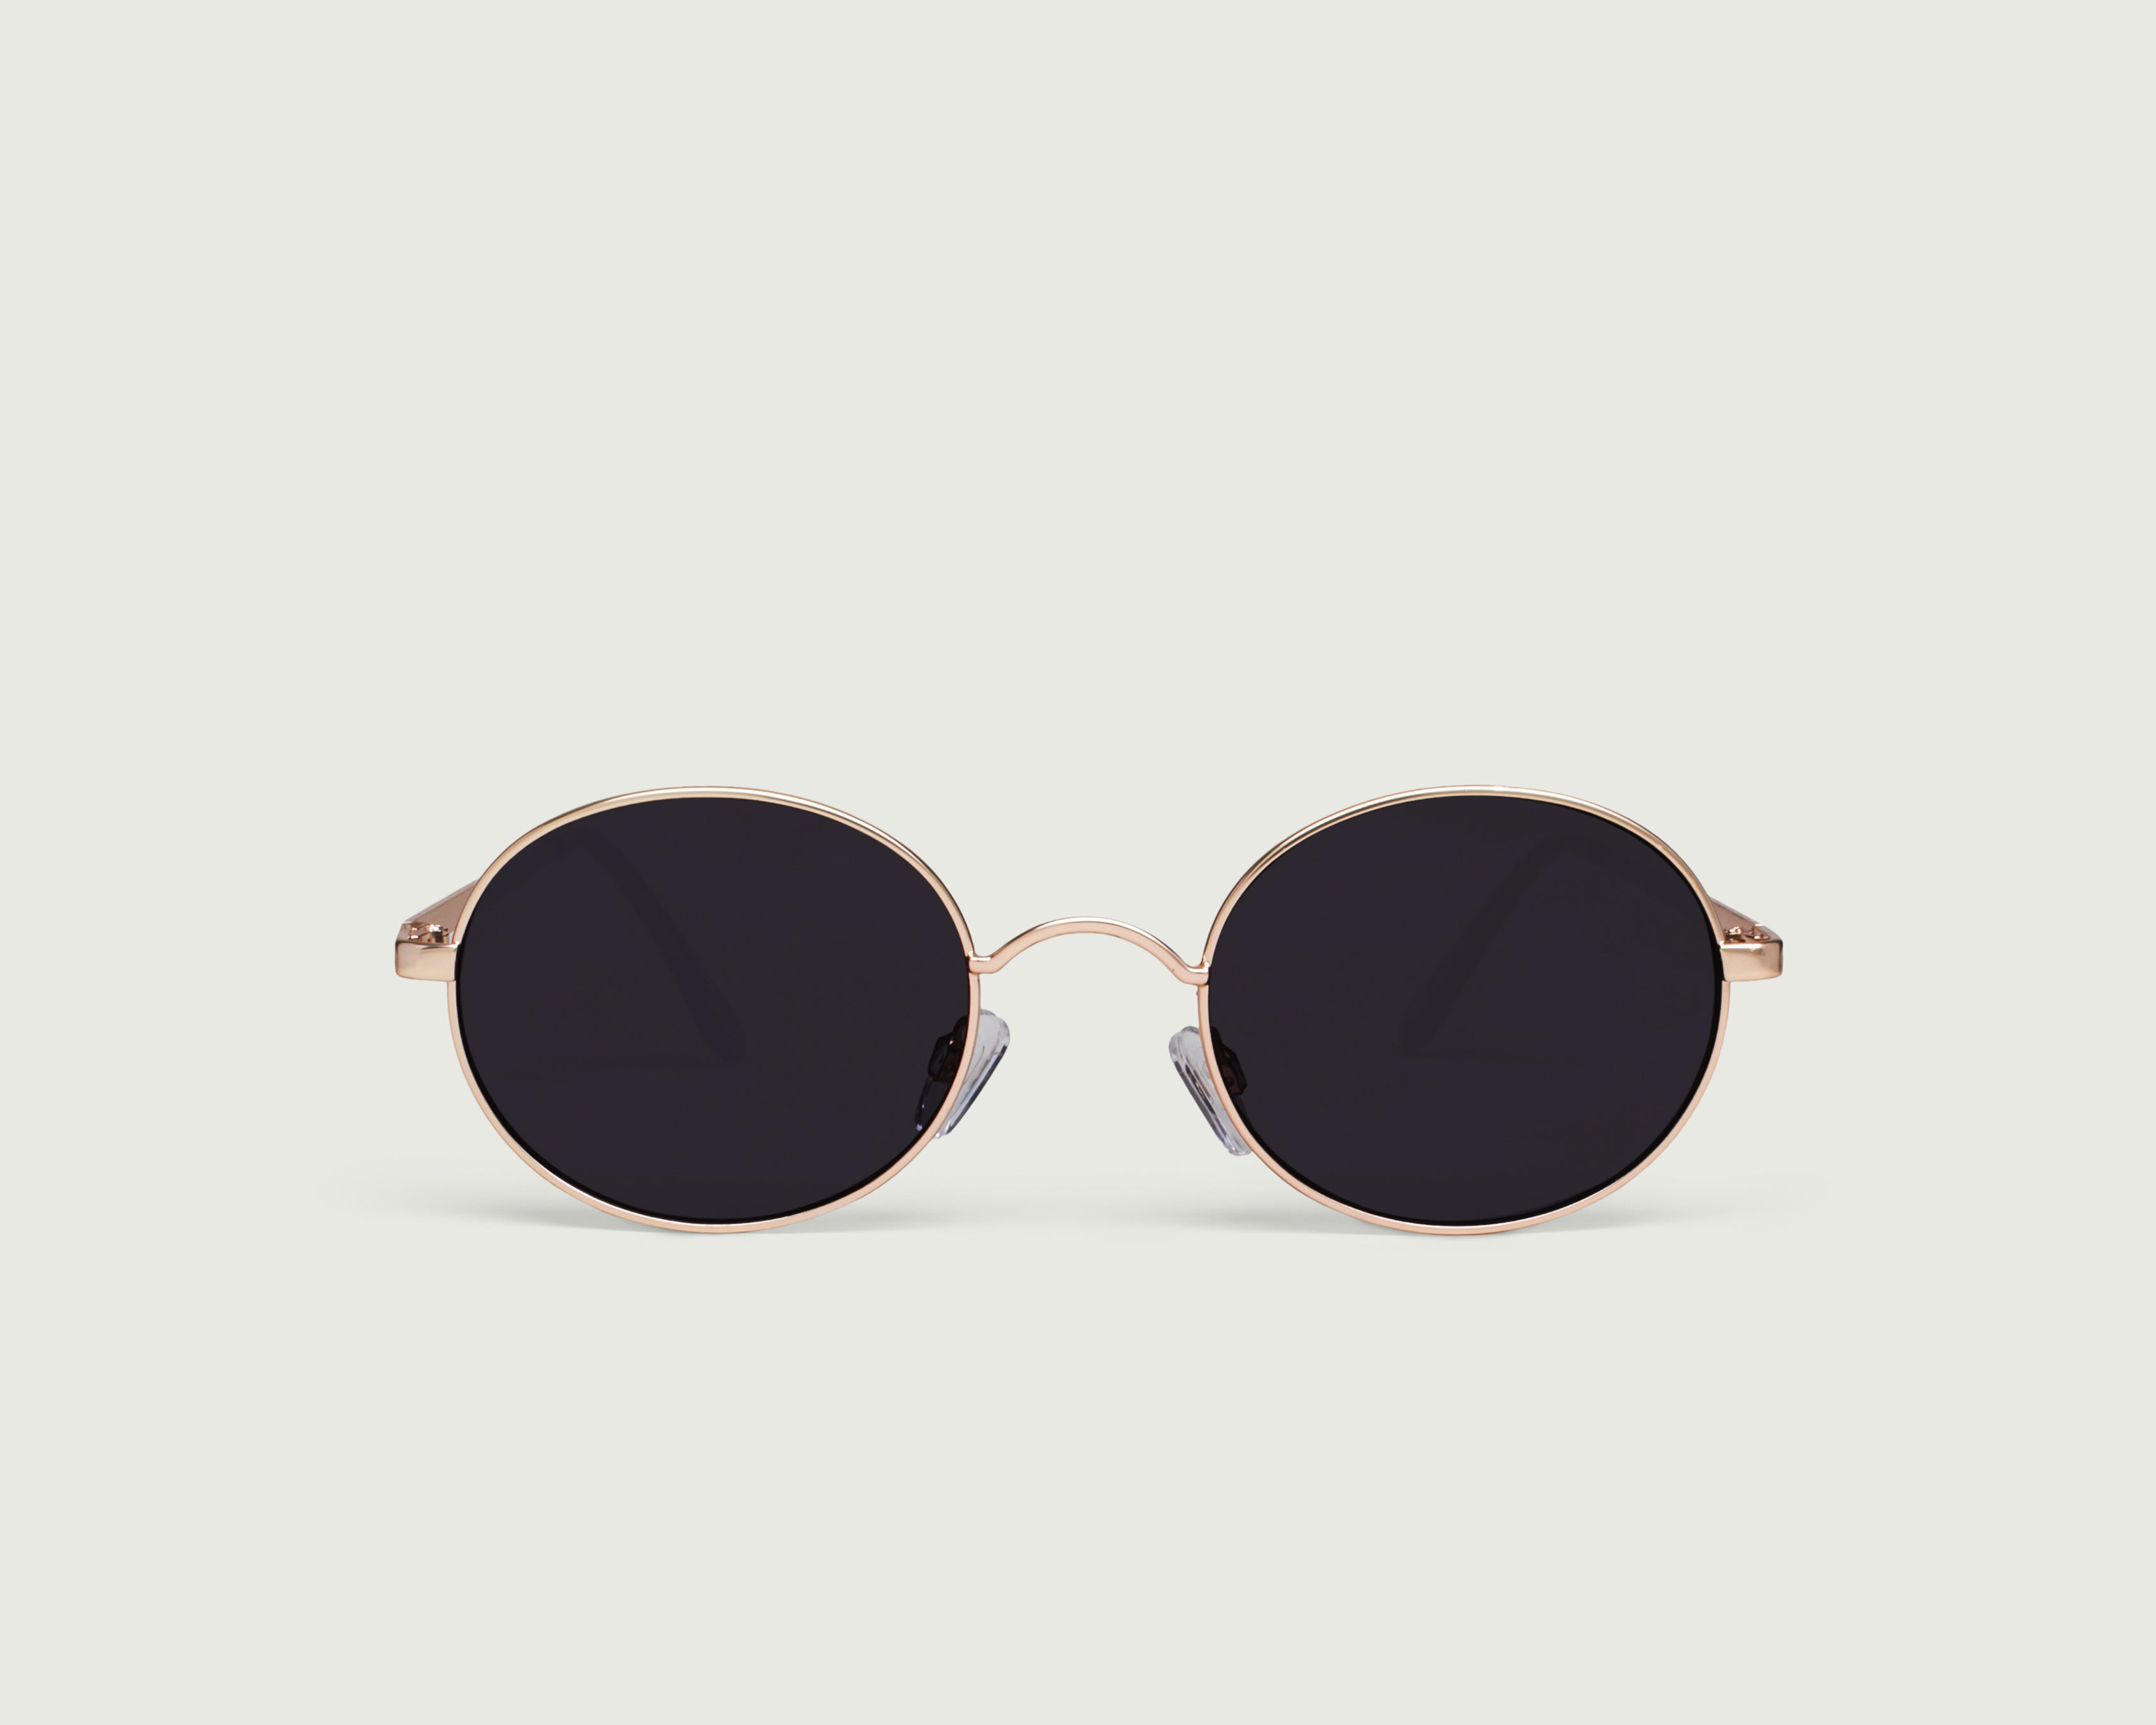 Ore::Rupert Sunglasses round gold metal front (4687761965110)